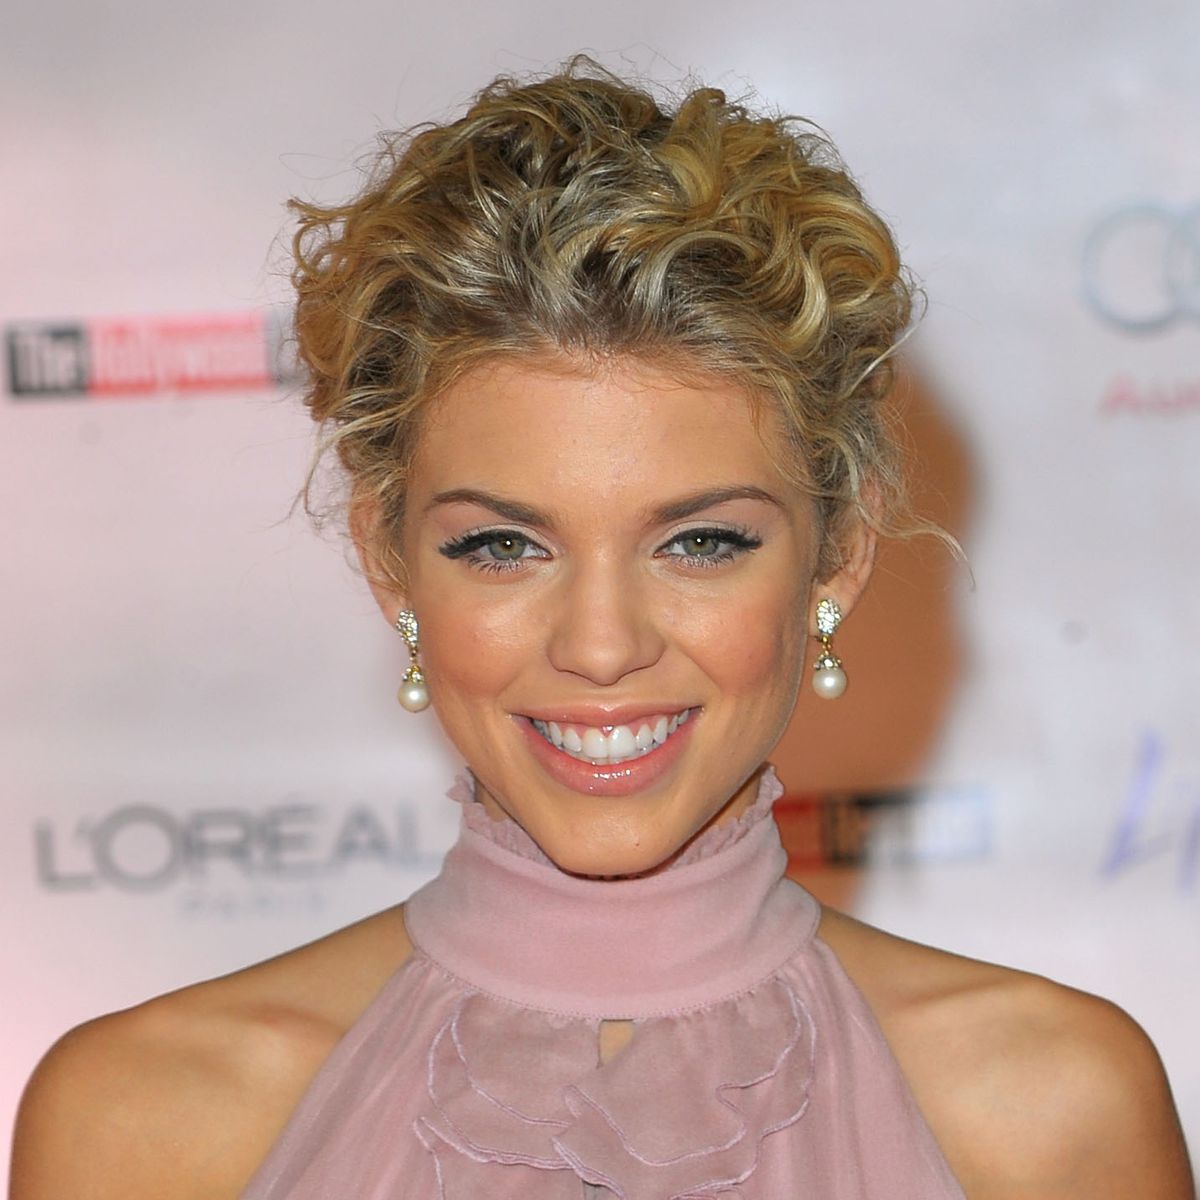 AnnaLynne McCord - Transformation - Beauty - Celebrity Before and After